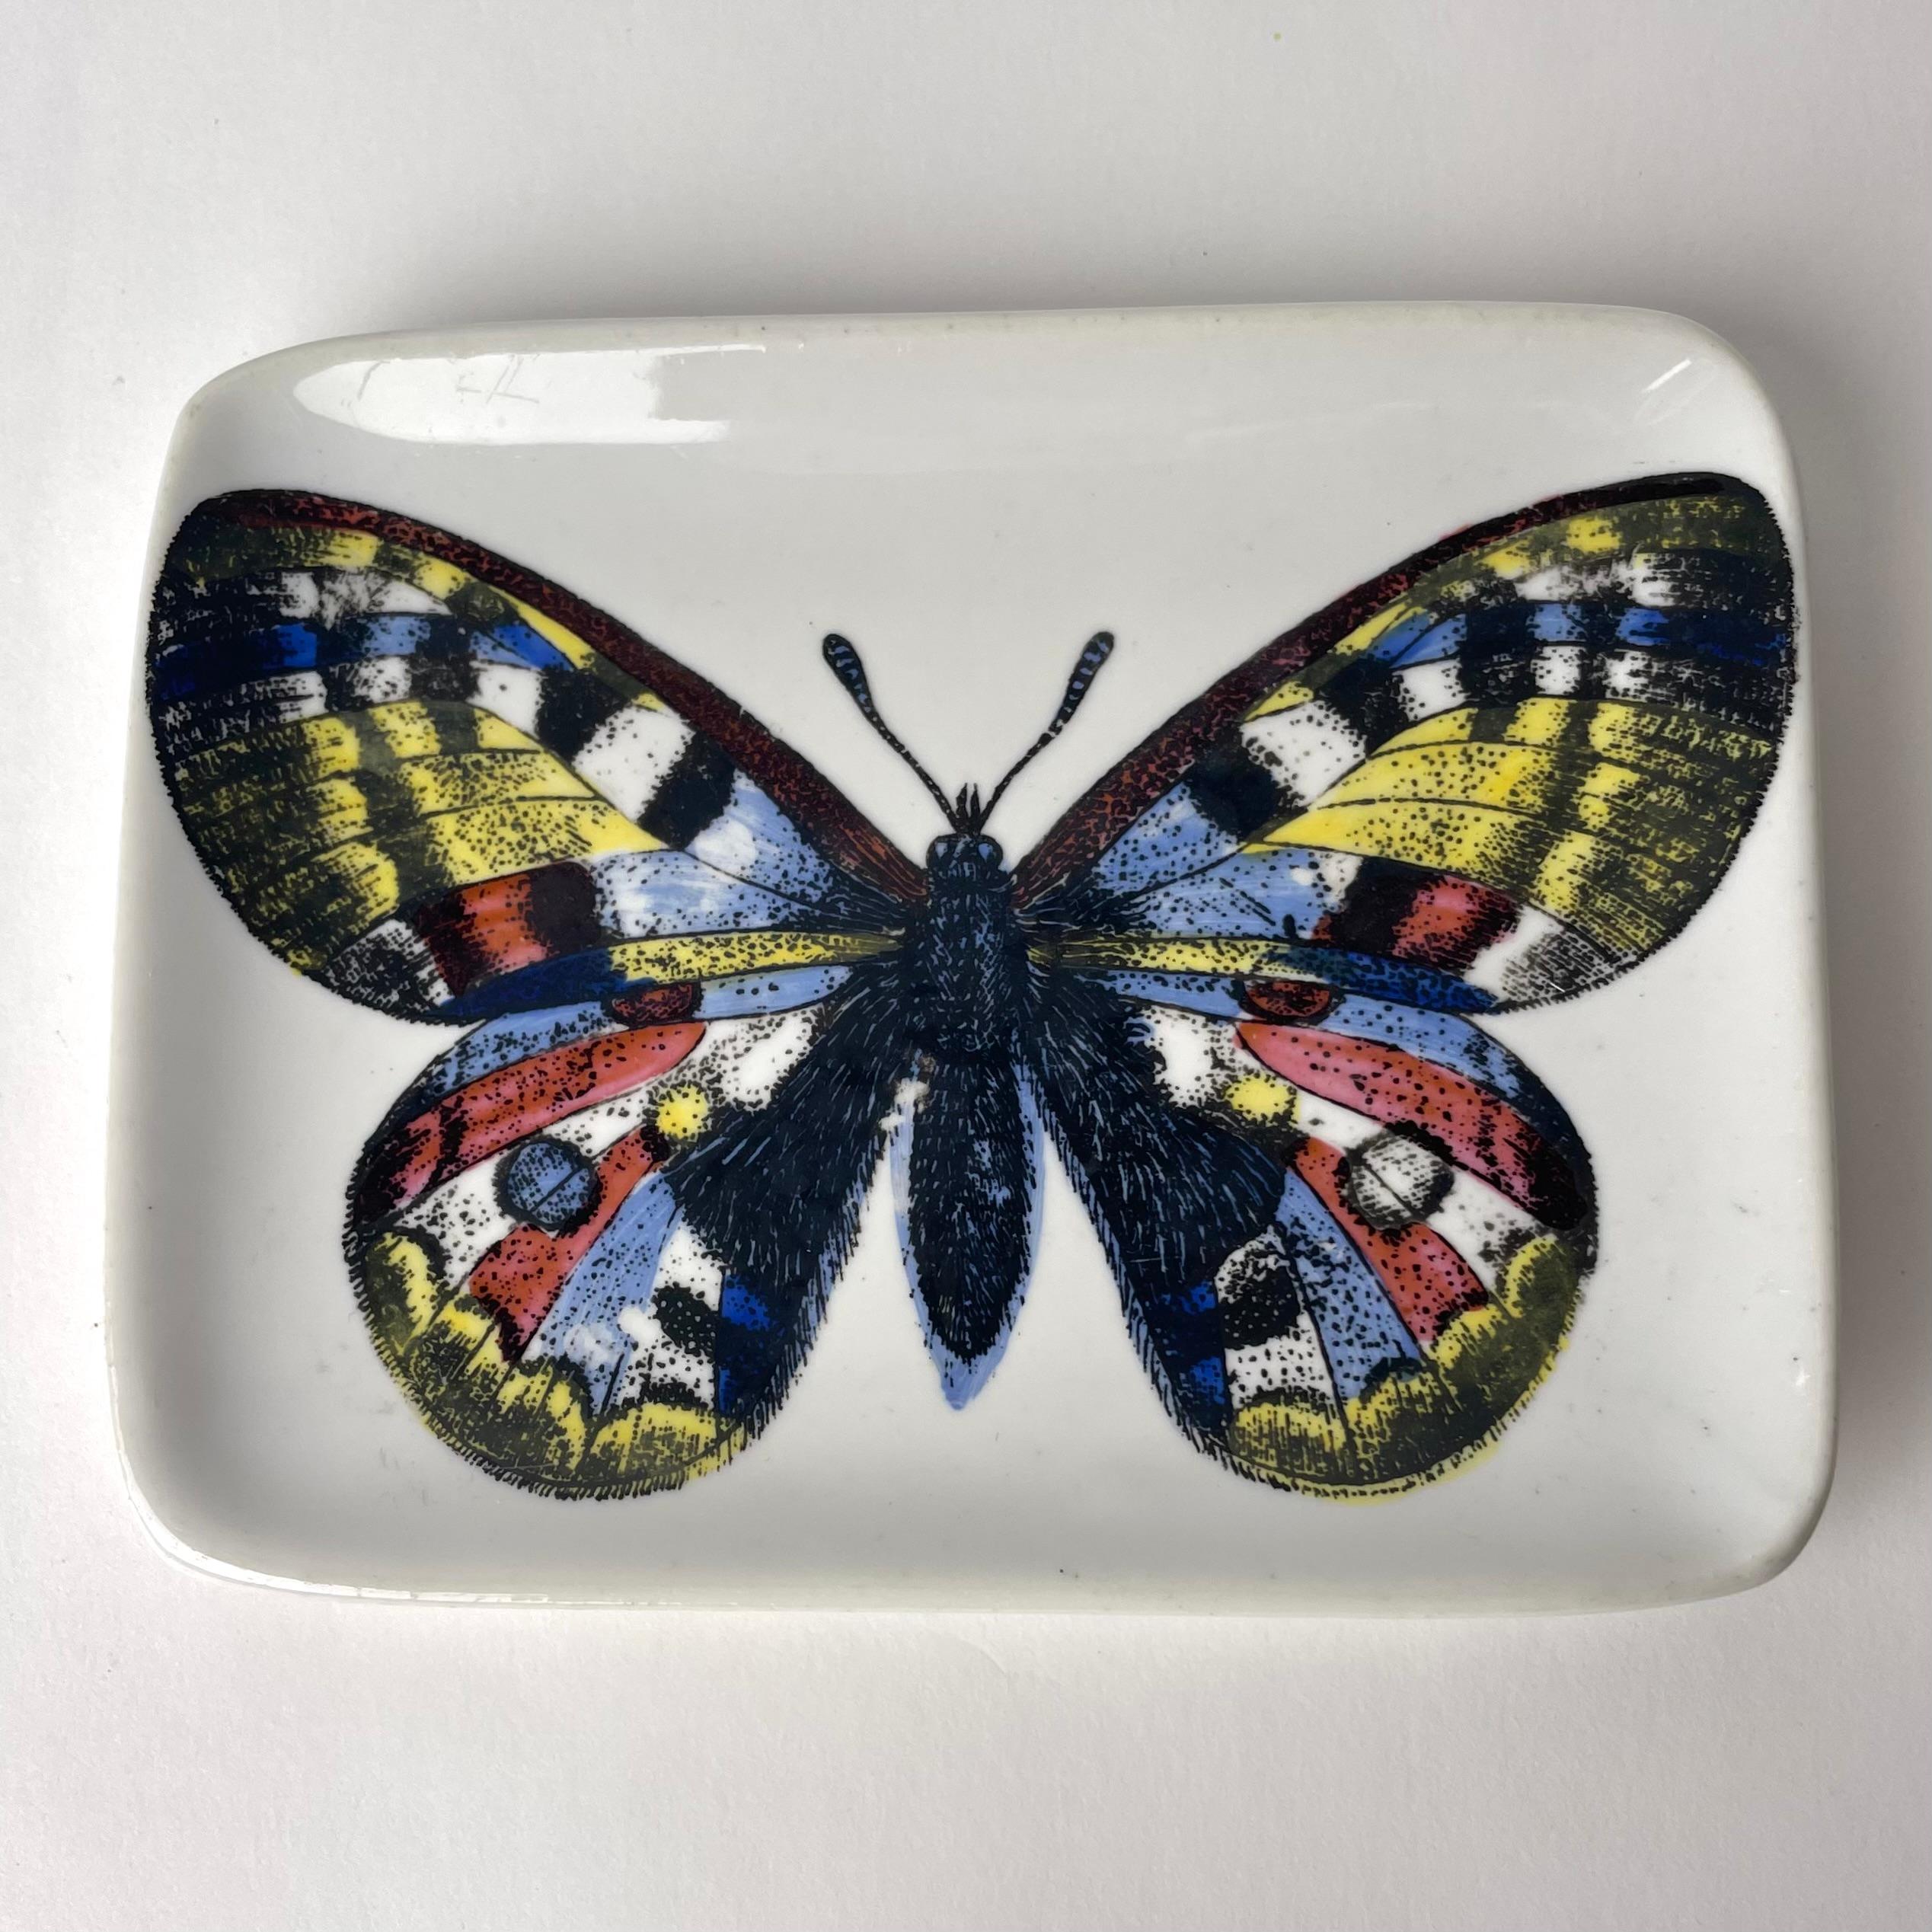 A Beautiful dish with a Butterfly in porcelain designed by Piero Fornasetti during the Mid-20th Century. Typical Fornasetti design and with a butterfly with beauful colors

Wear consistent with age and use 